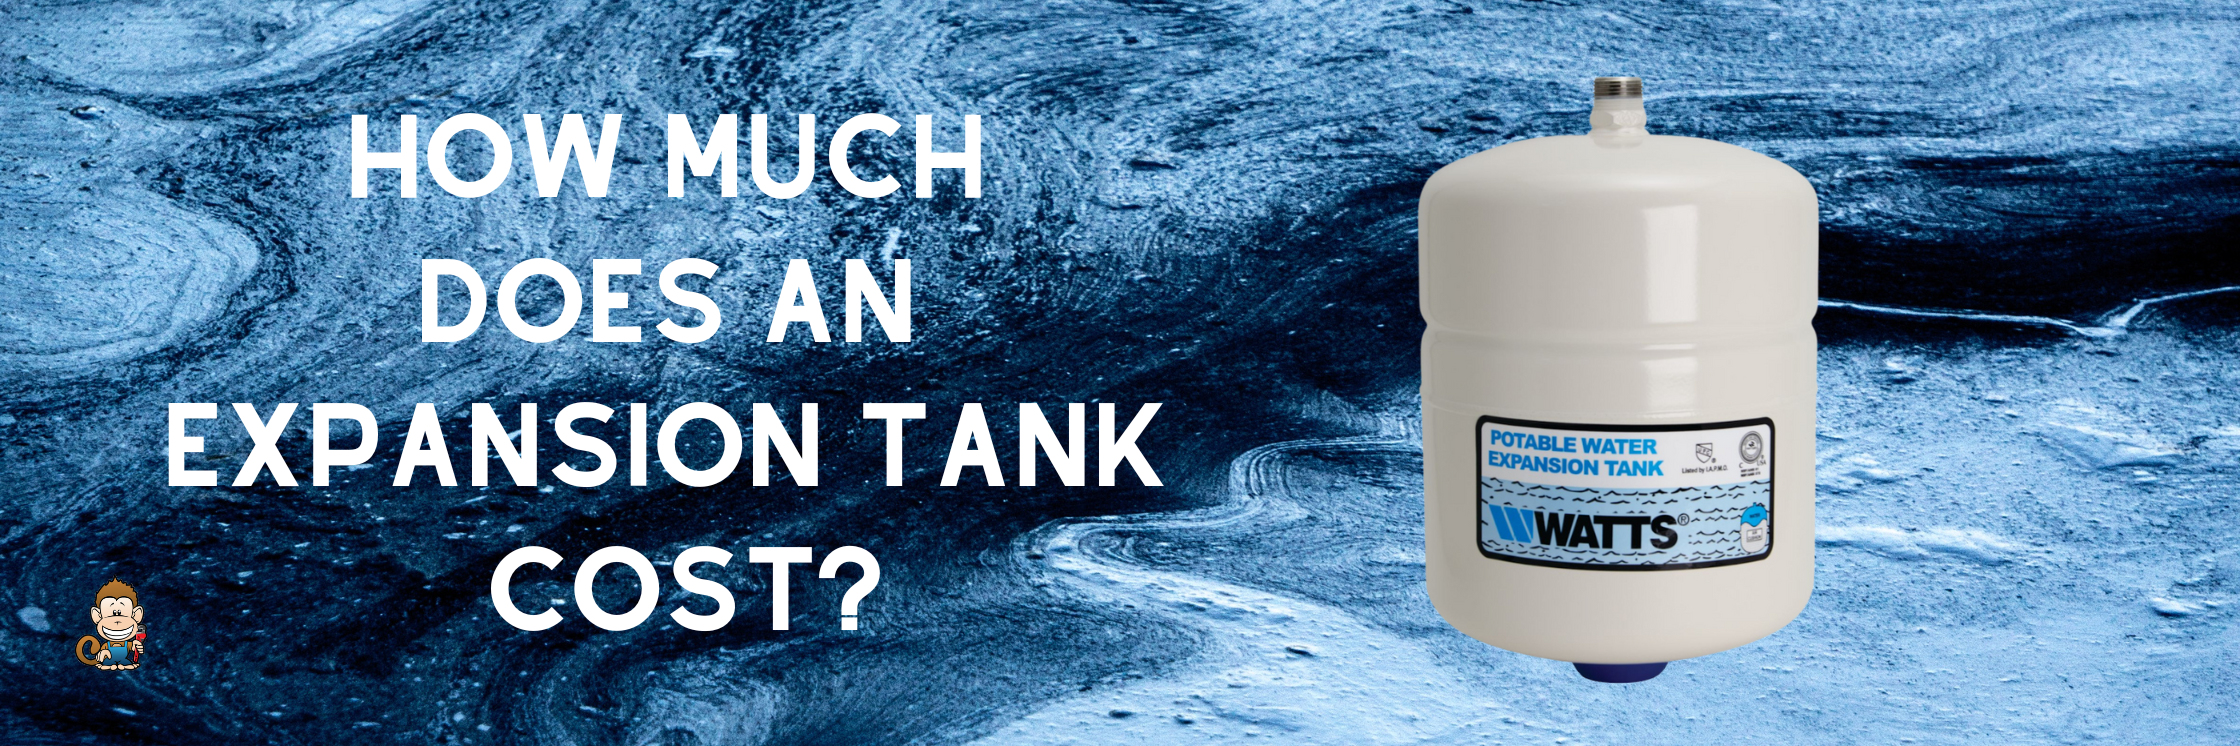 How Much Does an Expansion Tank Cost?